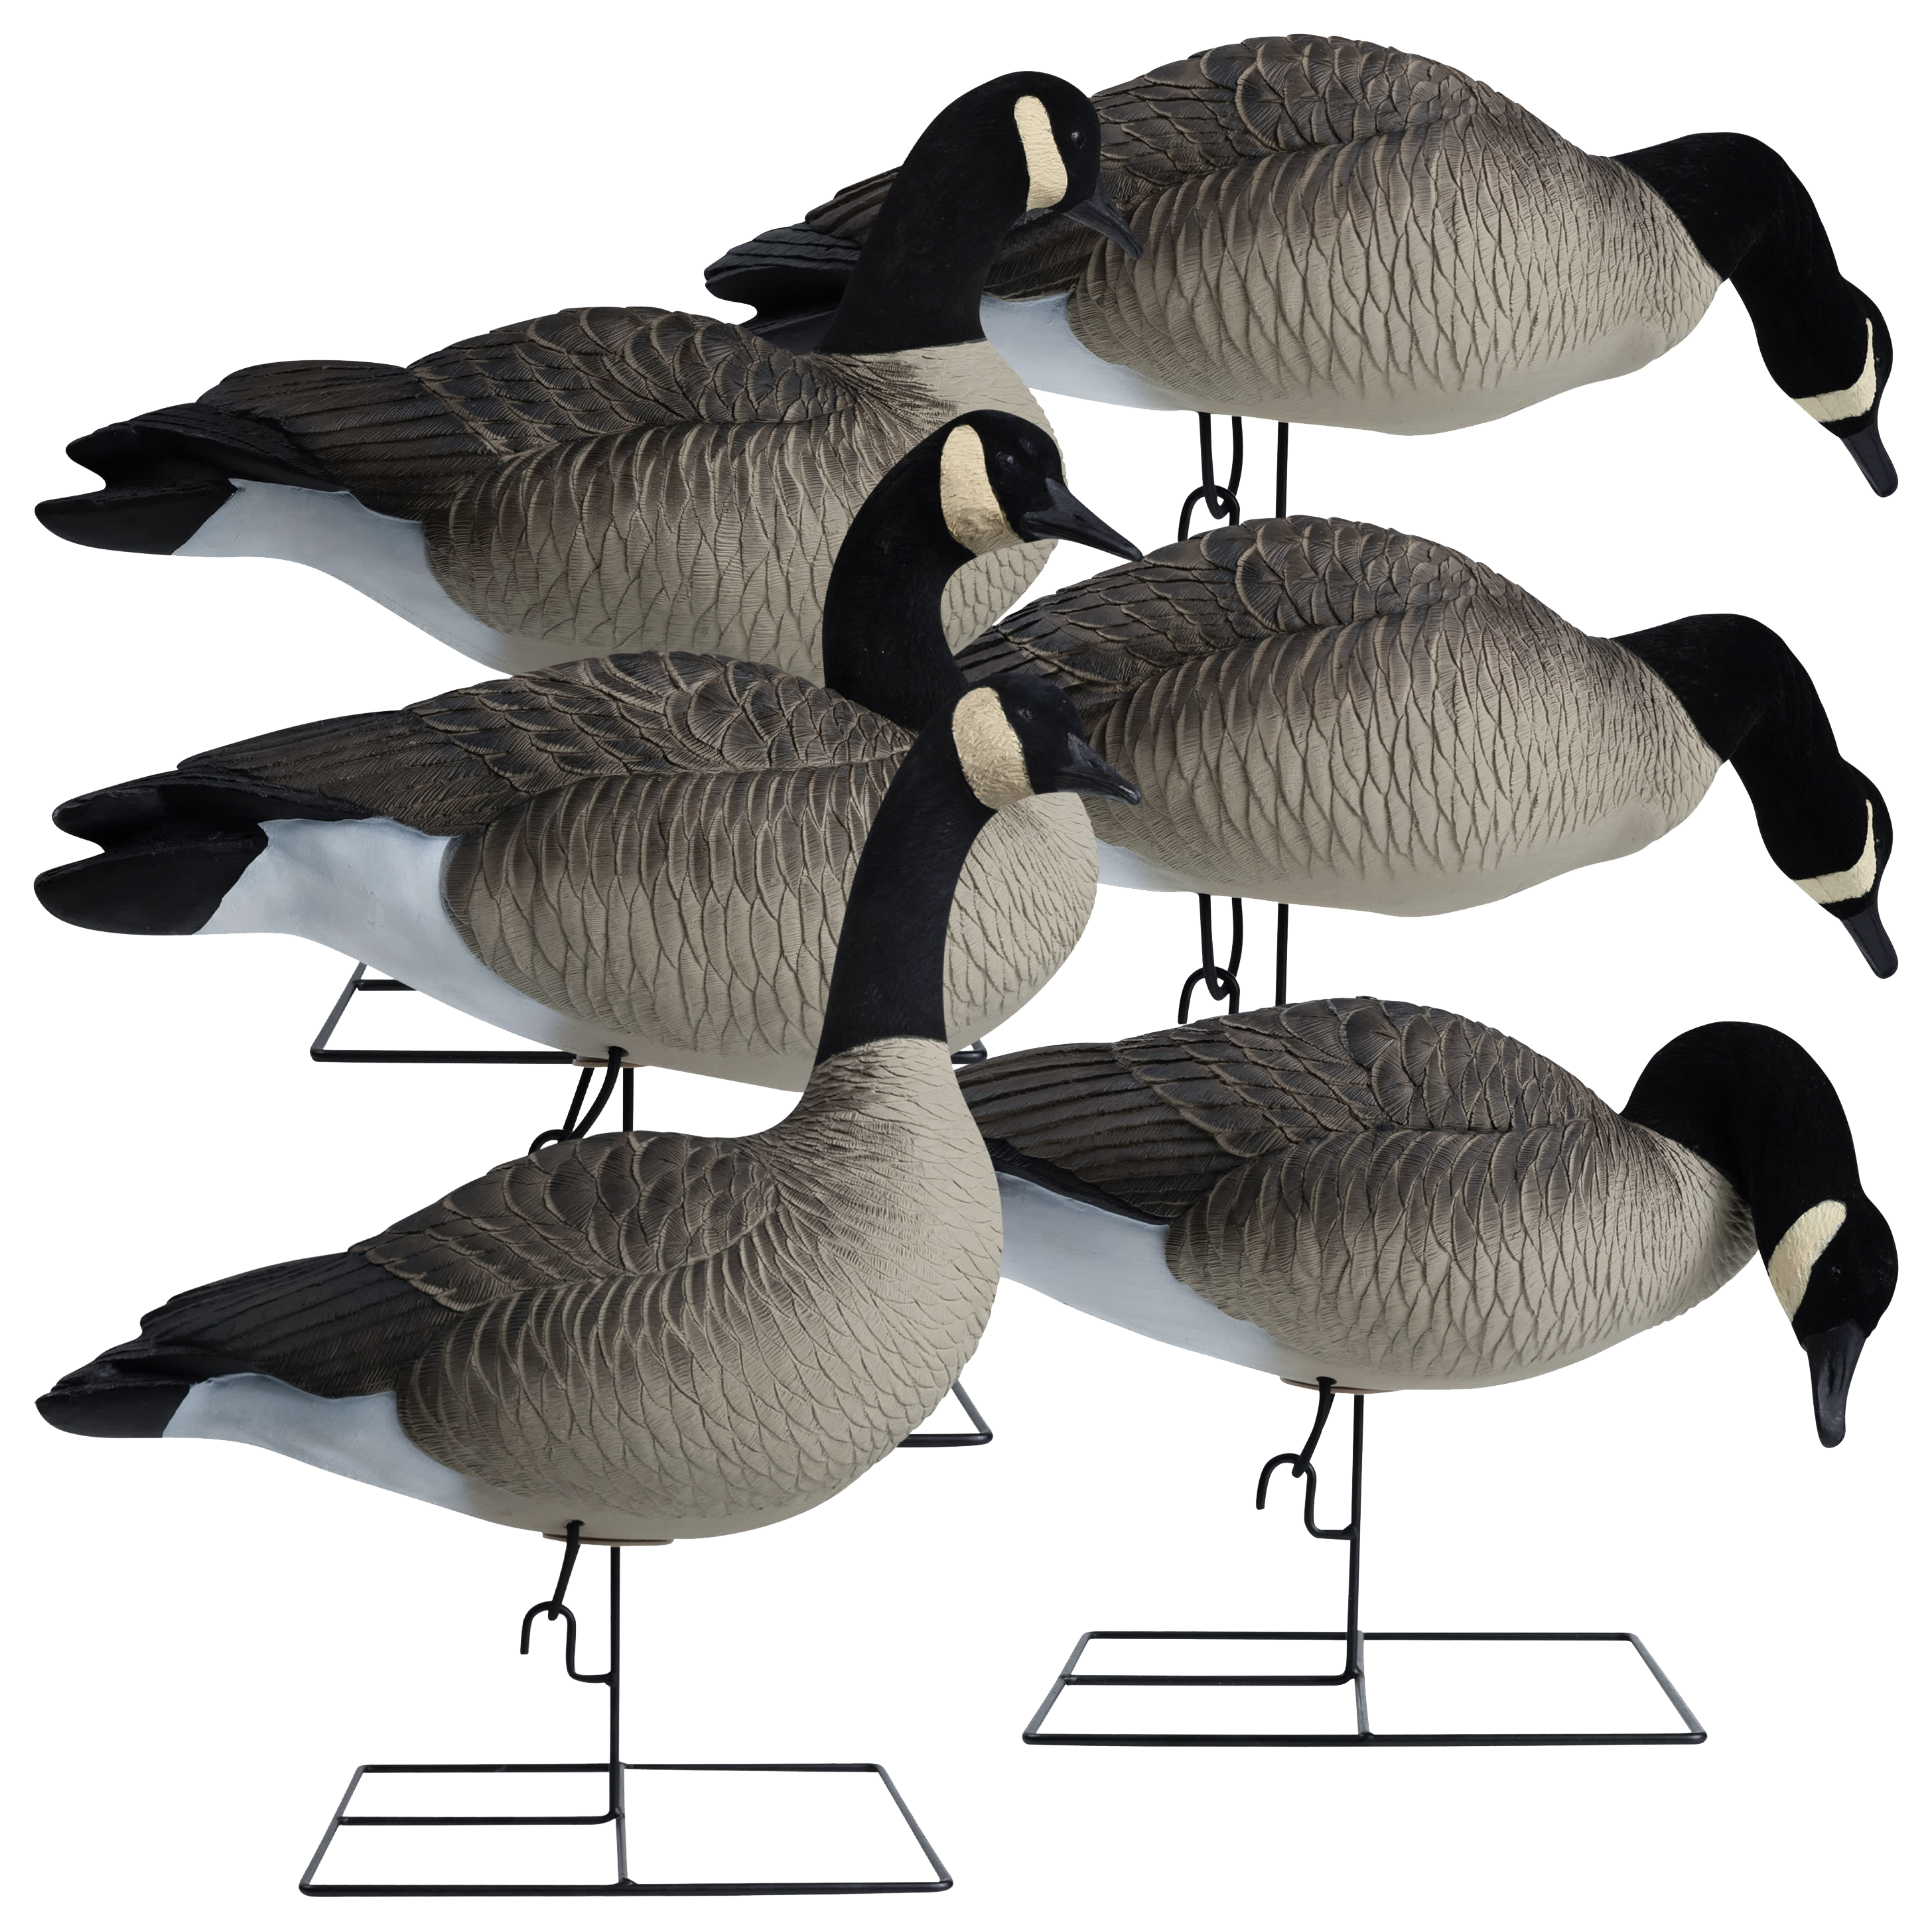 Hardcore Decoys Rugged Series Full Body Canada Goose Decoys TouchDown Pack